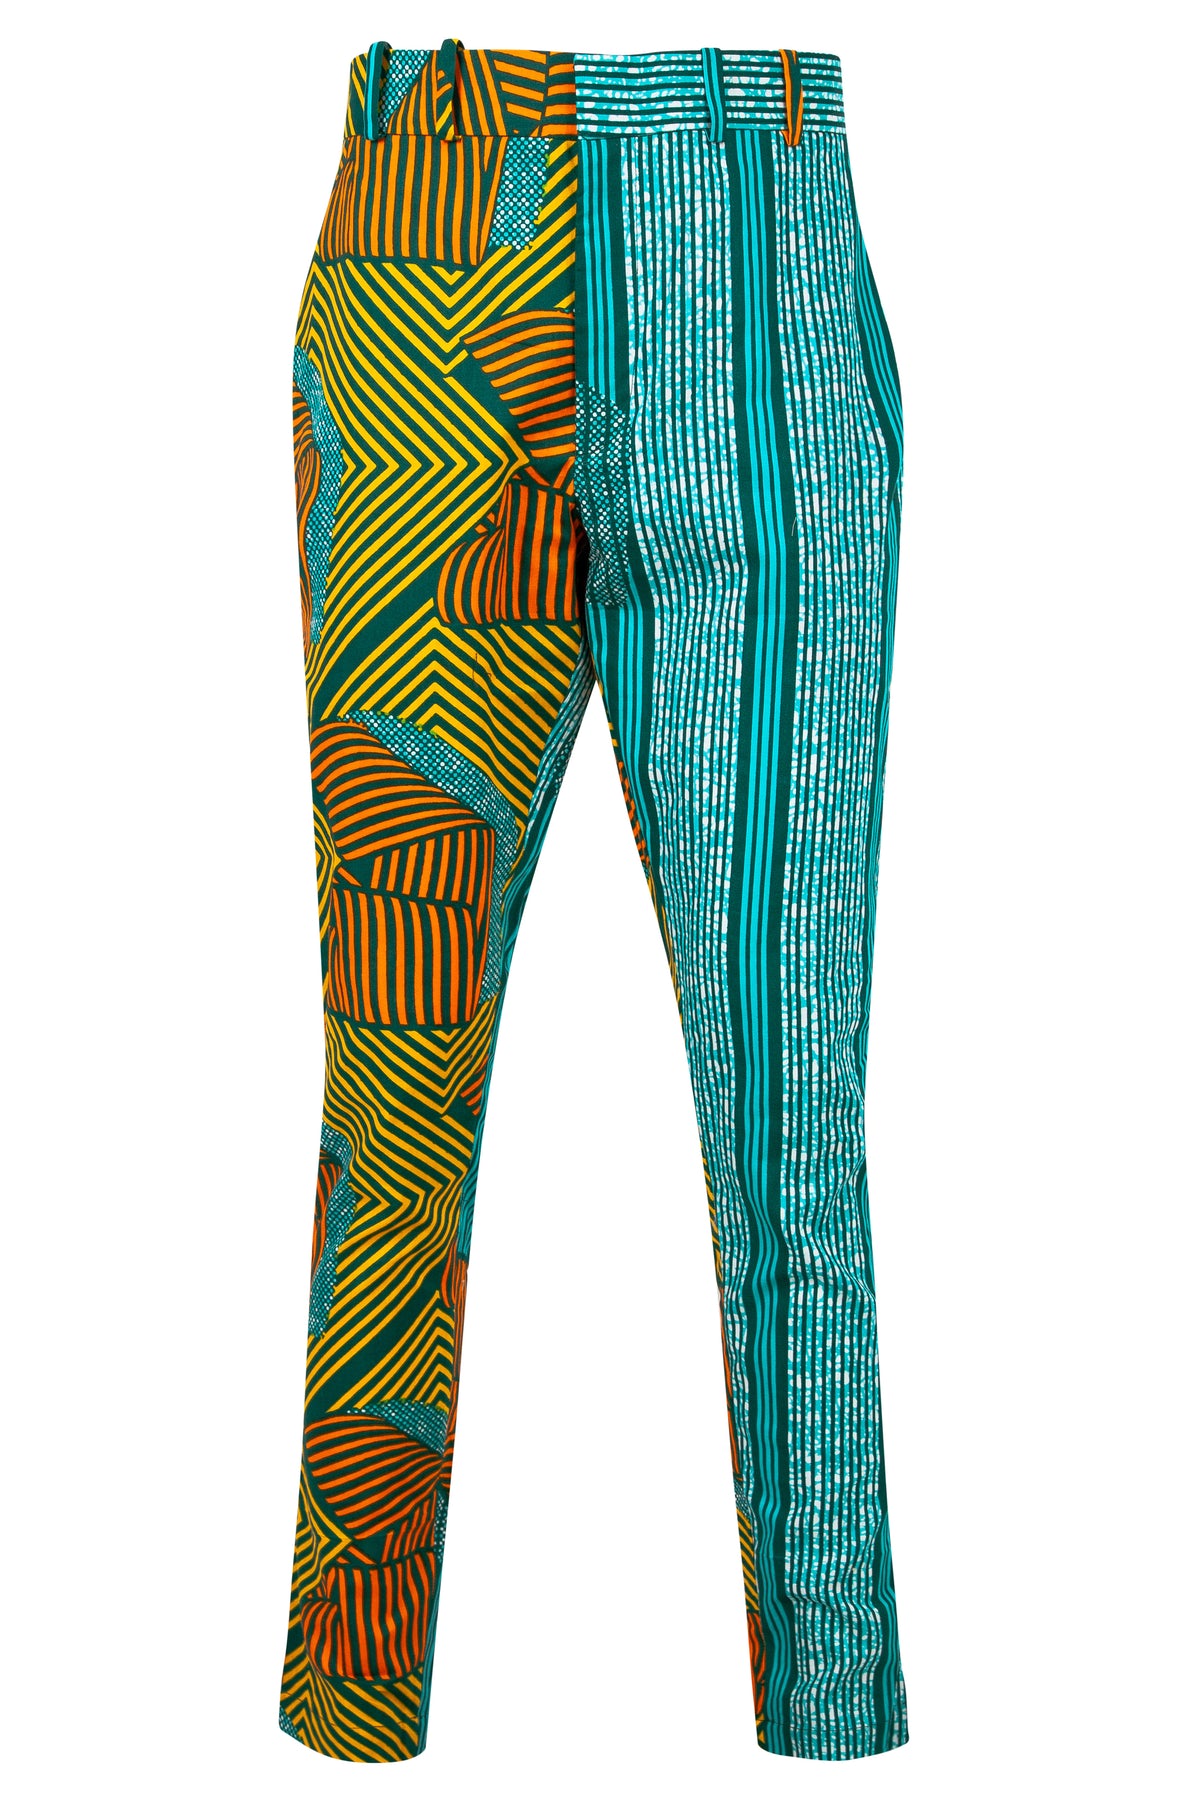 Osei Men's African print fitted trousers-Asso - OHEMA OHENE AFRICAN INSPIRED FASHION